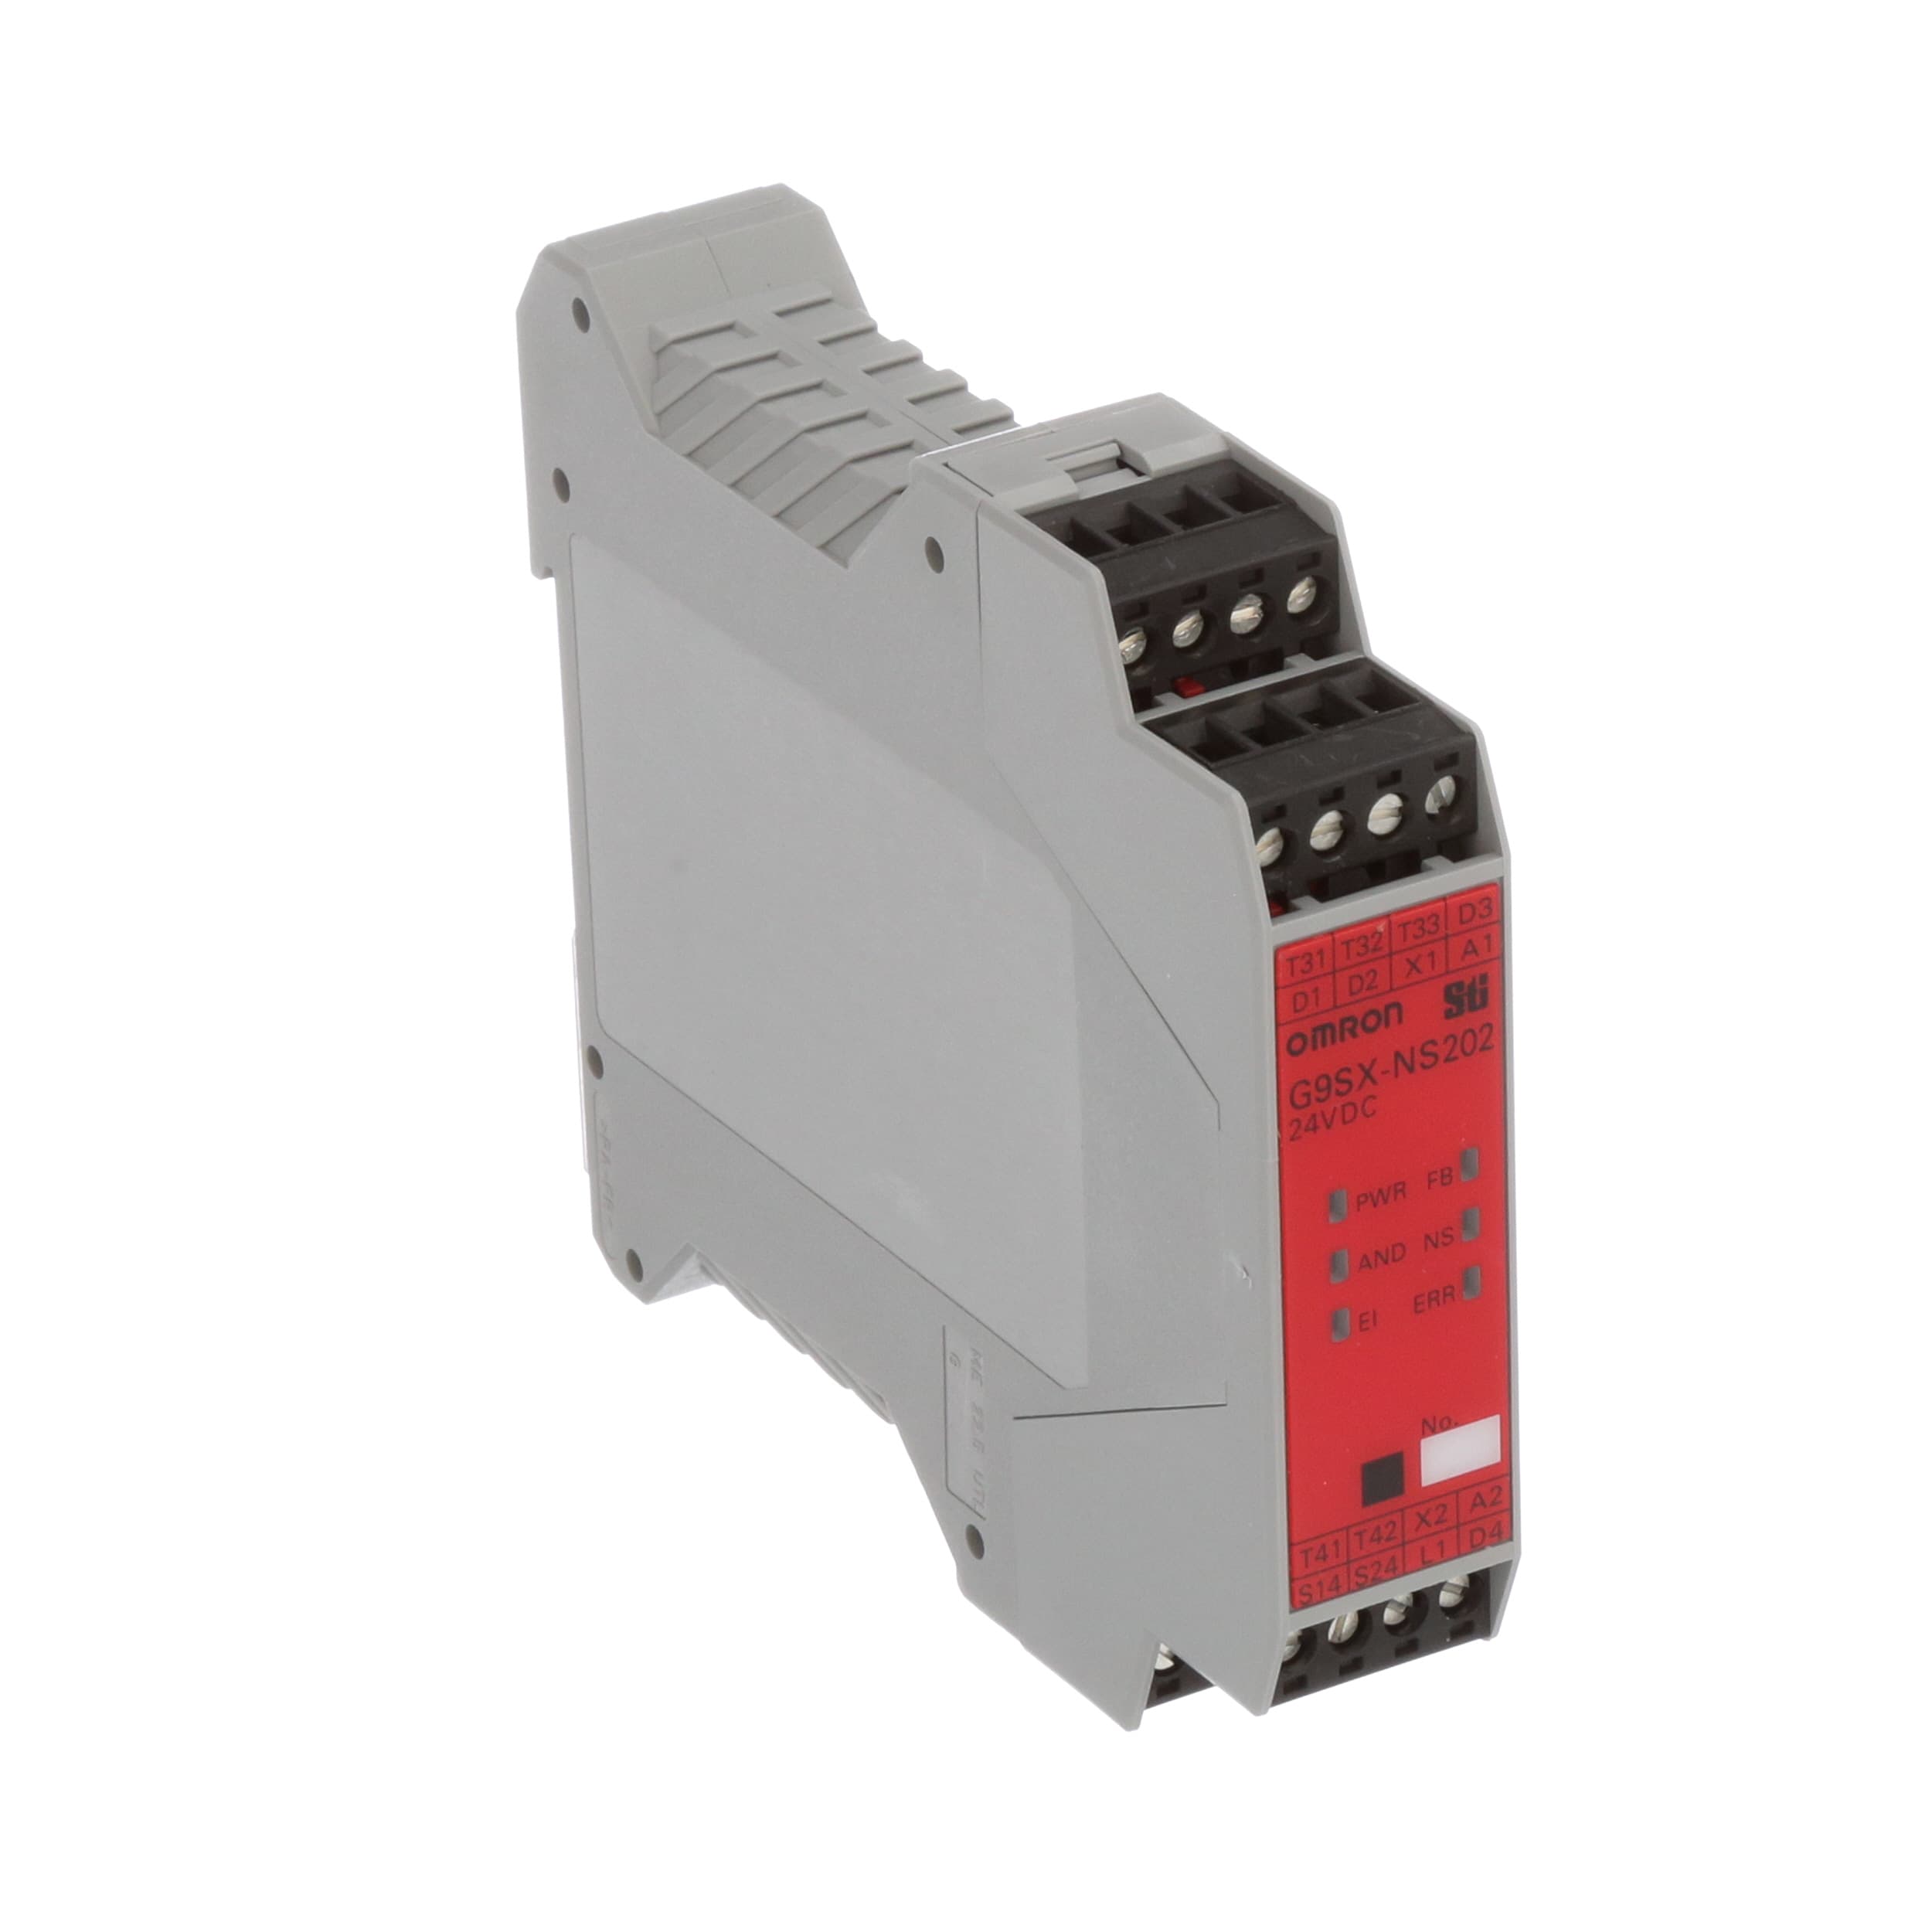 Omron Automation - G9SX-NS202-RT DC24 - Safety Relay for D40A Non